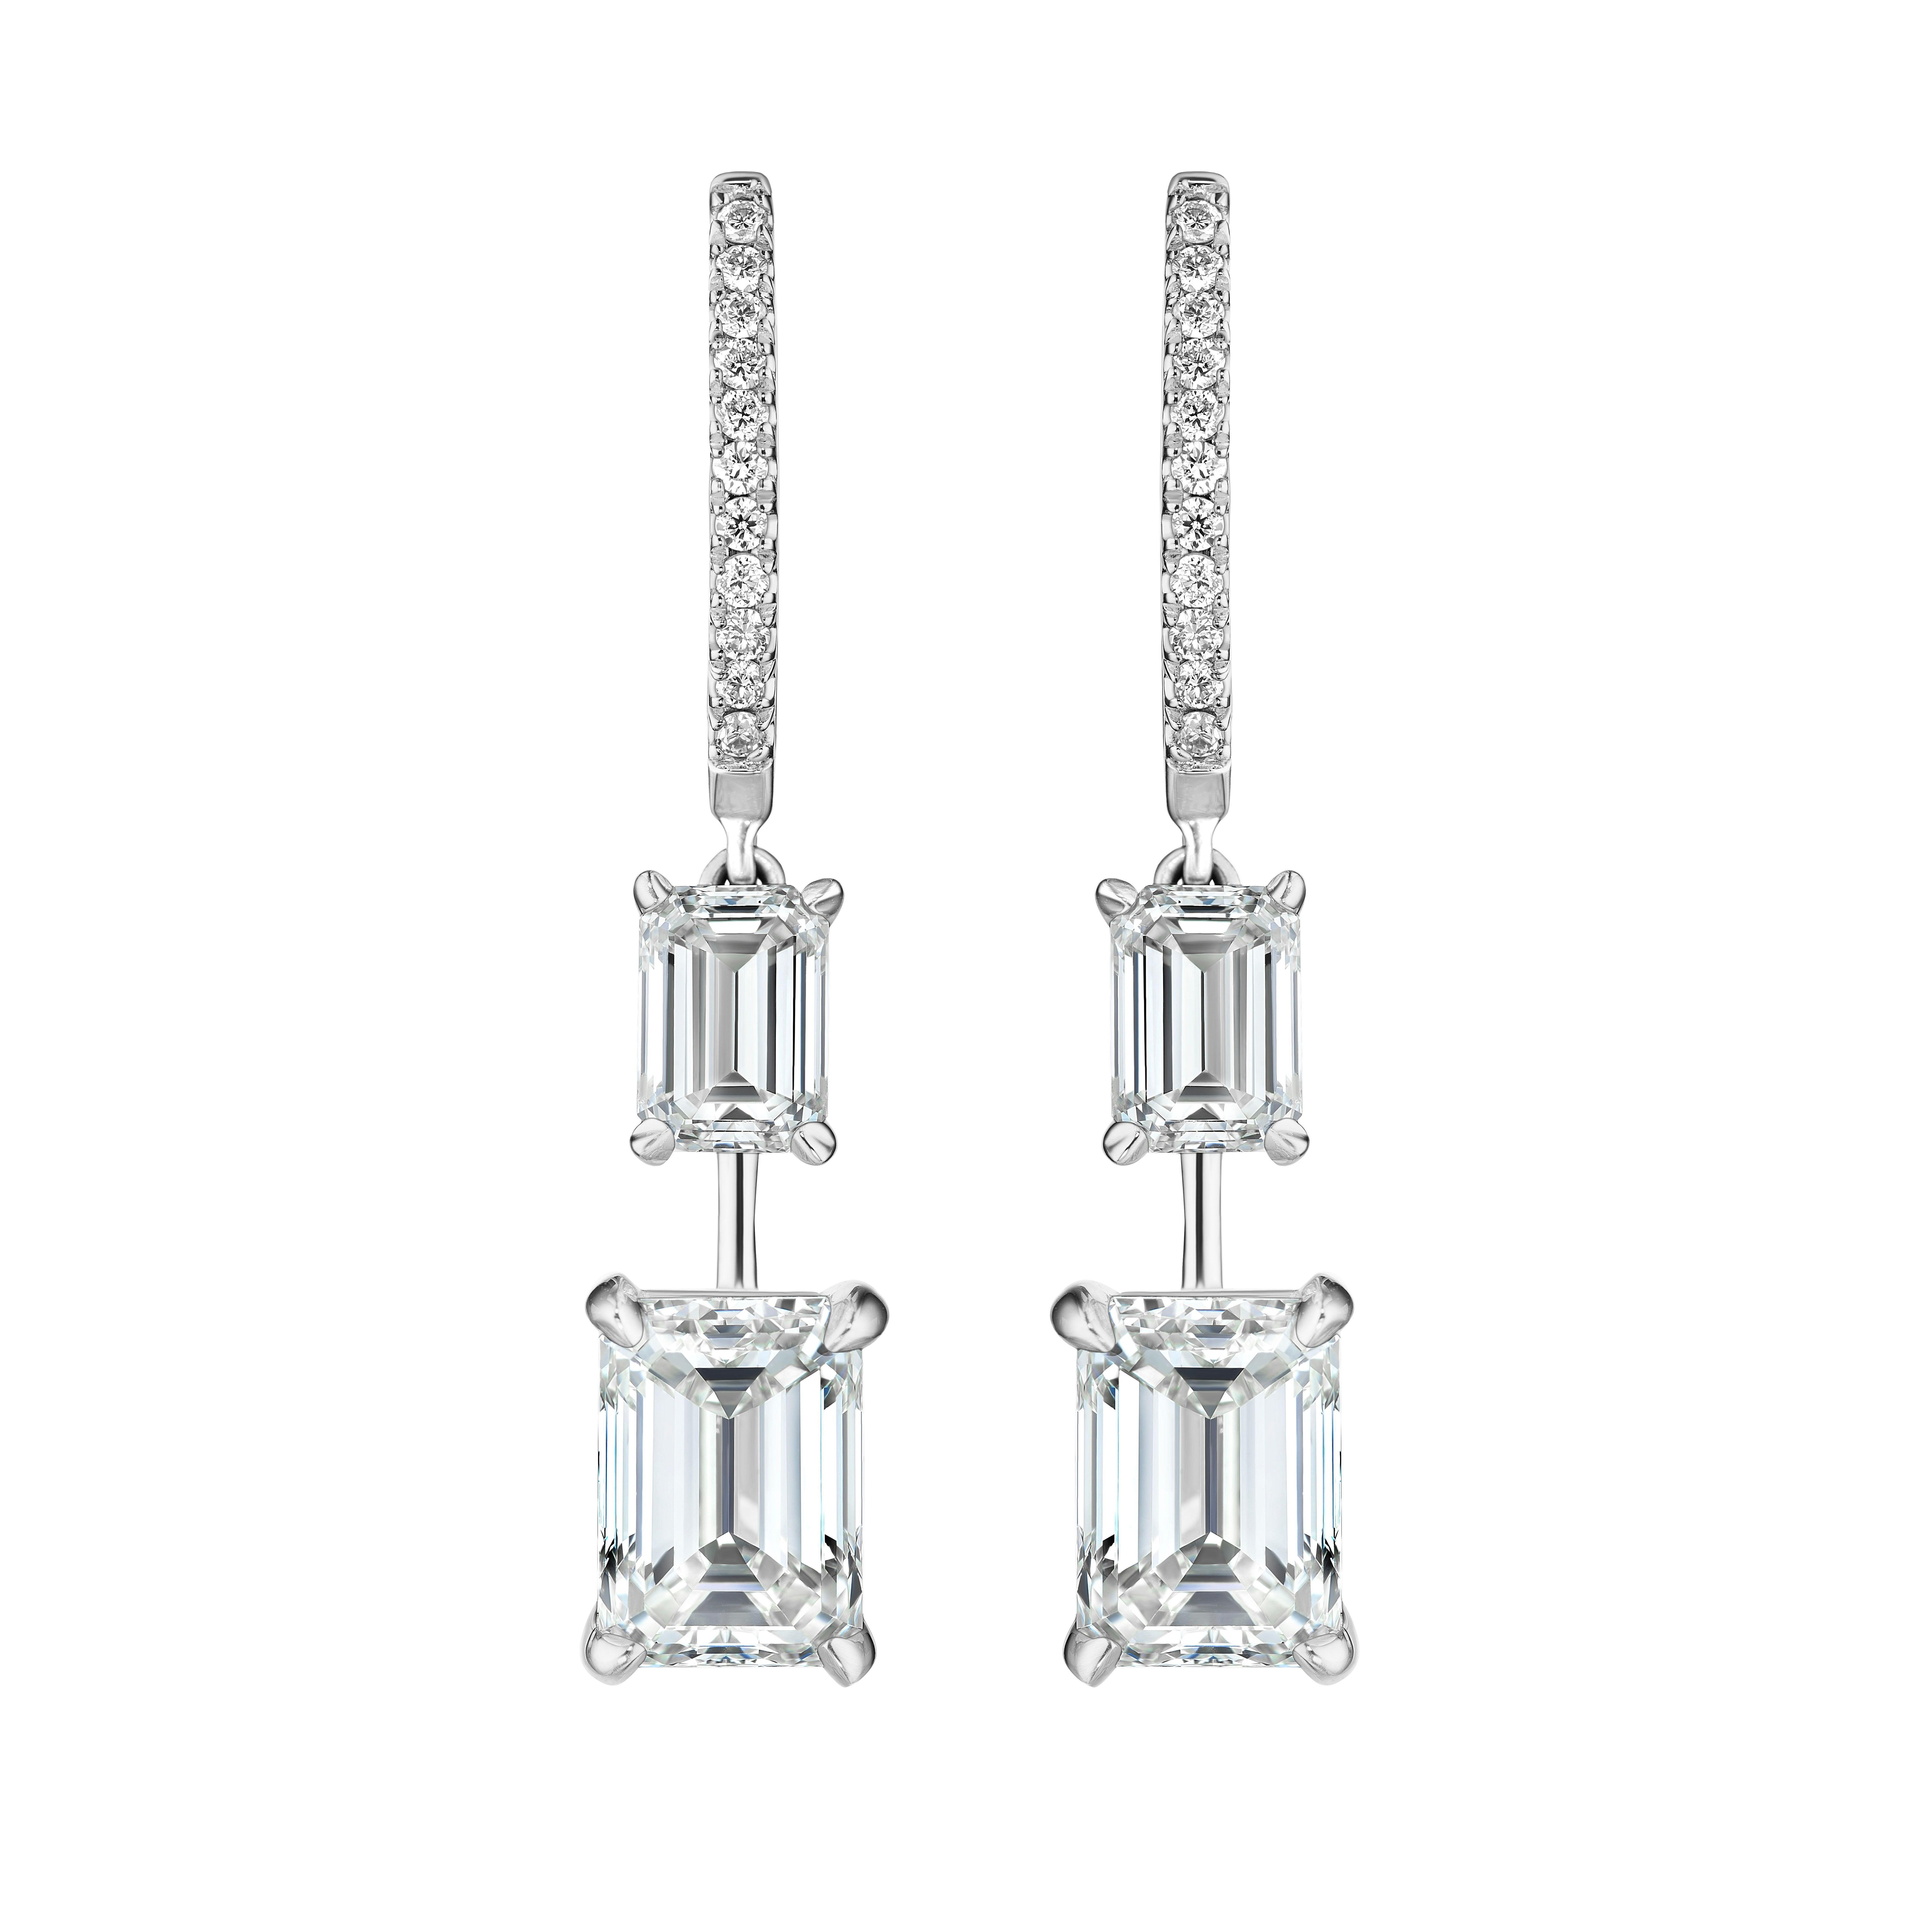 •	18KT White Gold
•	4.25 Carats
•	Sold as a pair (2 earrings in total)

•	Number of Emerald Cut Diamonds: 2
o	1) 1.50ctw
o	Color: I
o	Clarity: SI2
o	GIA: 2298660063

o	2) 1.50ctw
o	Color: I
o	Clarity: SI2
o	GIA: 5306078690

•	Number of Emerald Cut